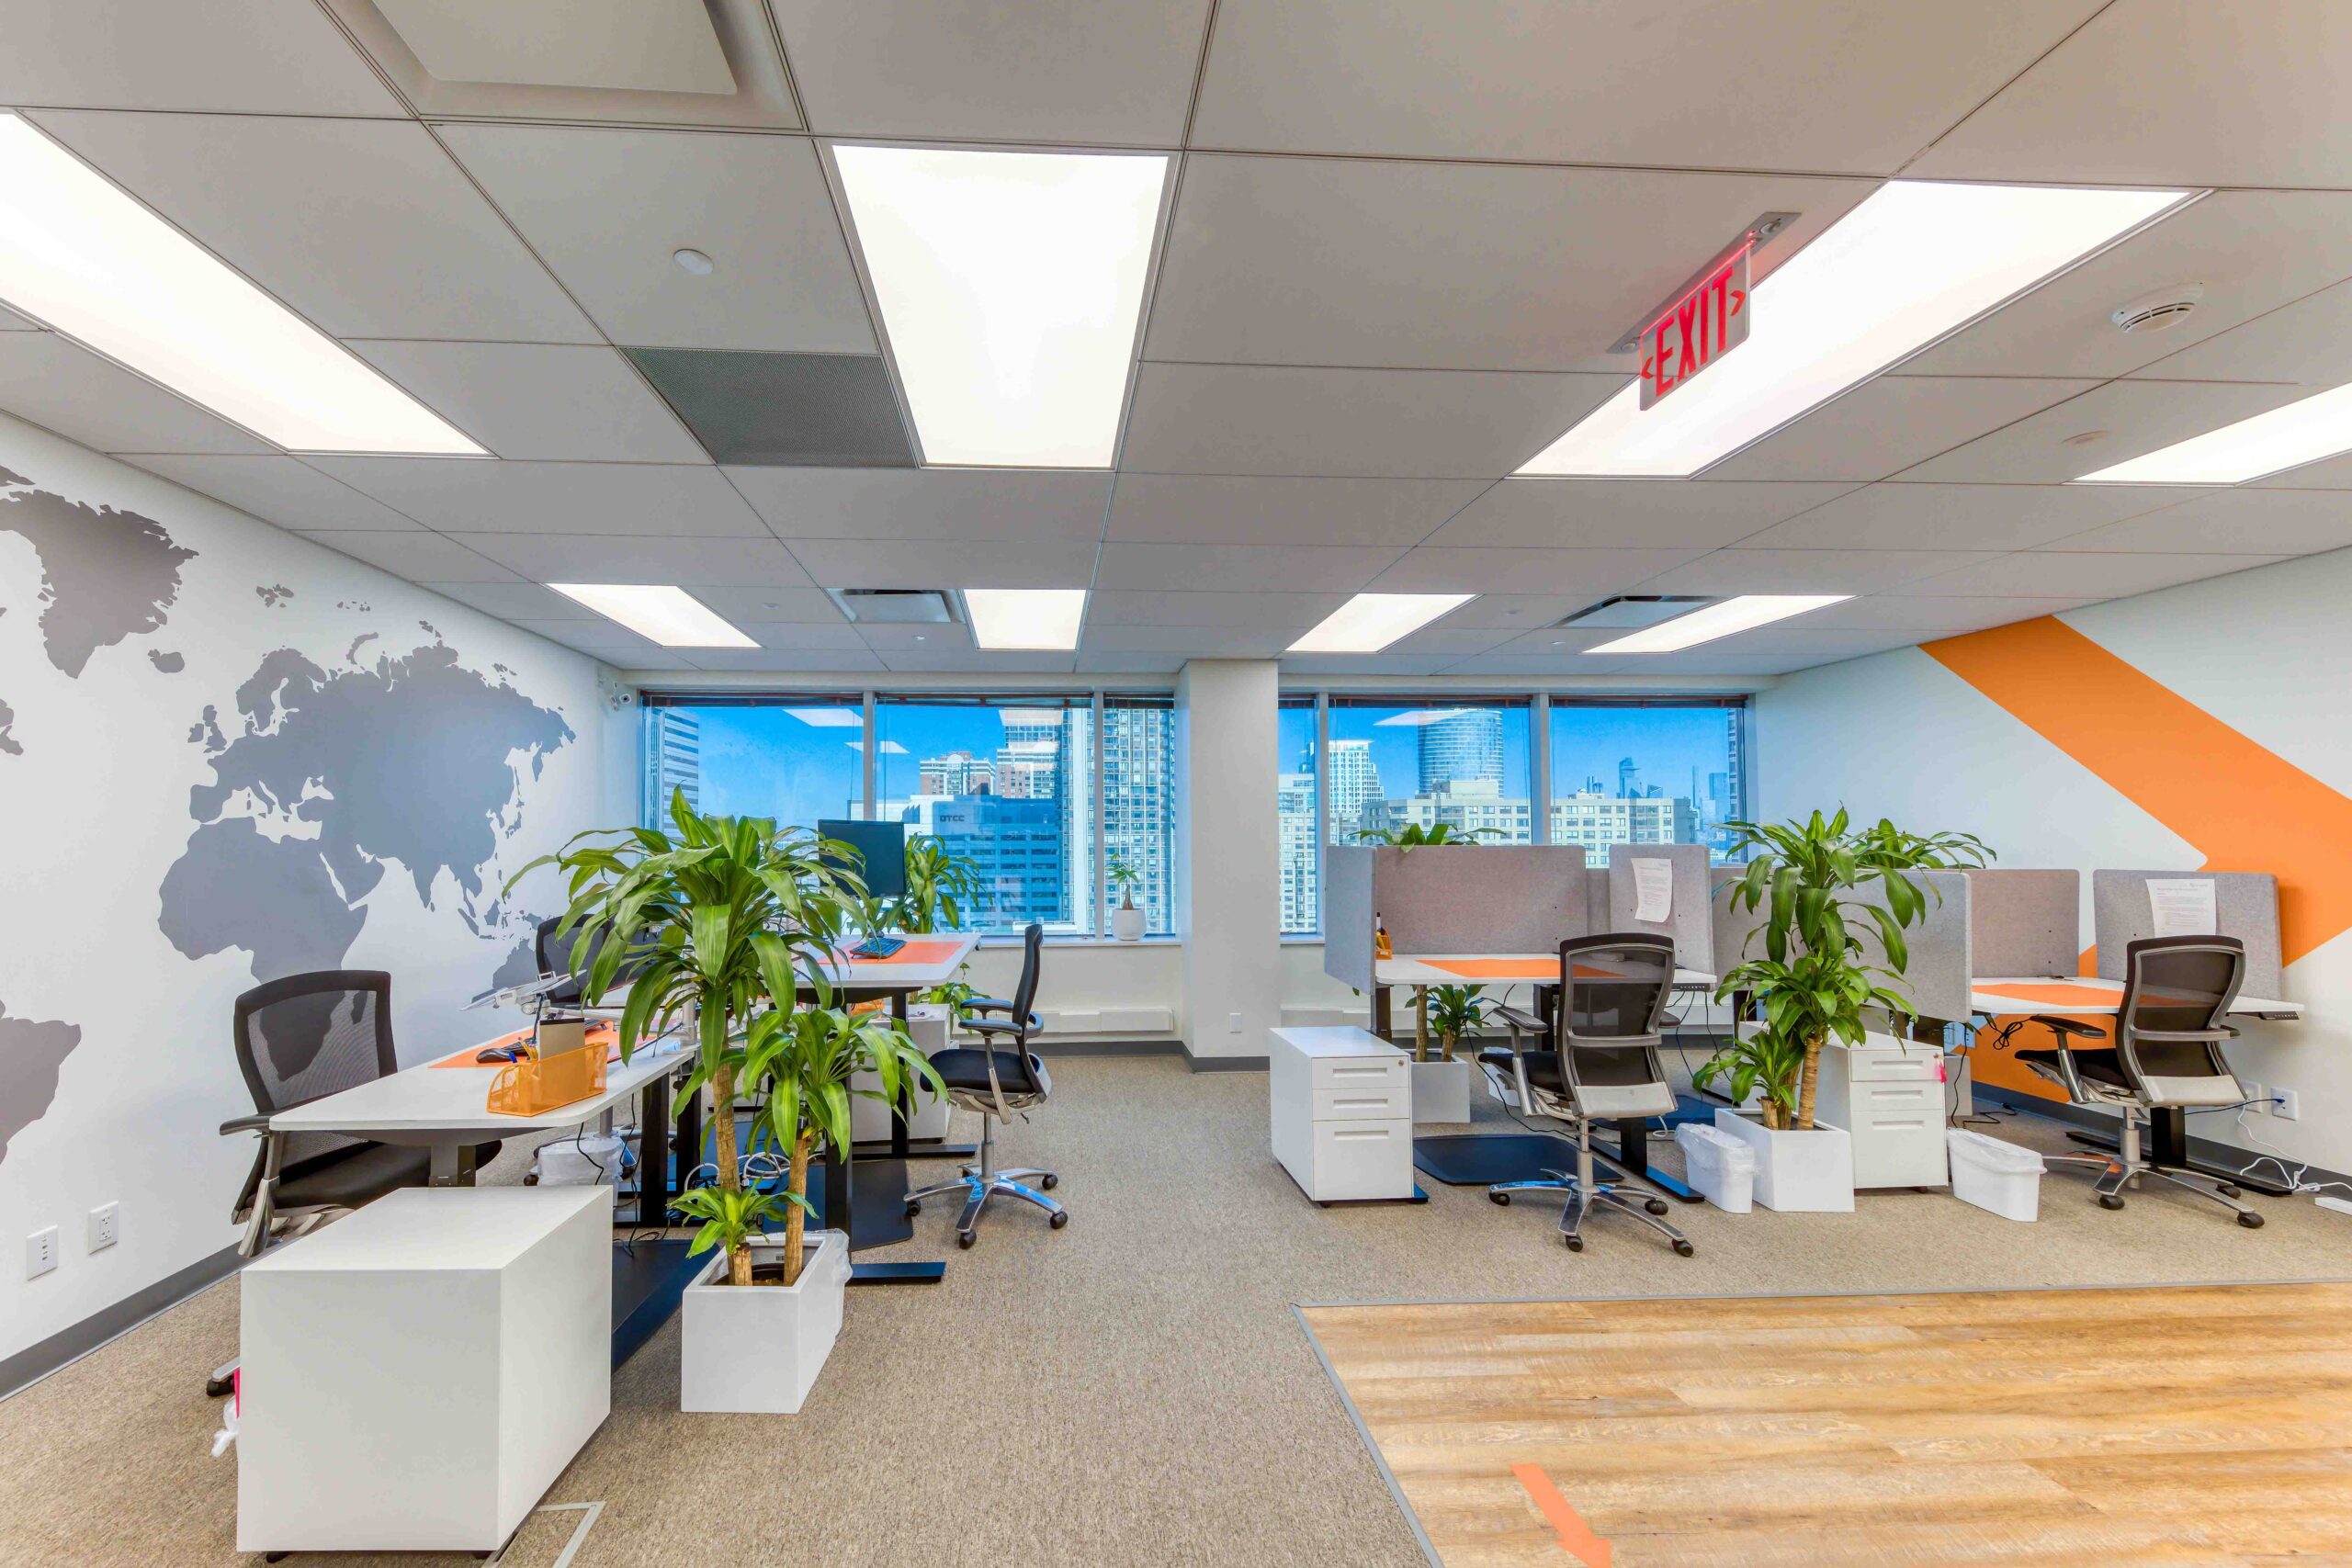 Enjoy the perks of renting a hot desk hour/day in Jersey City at zero investment